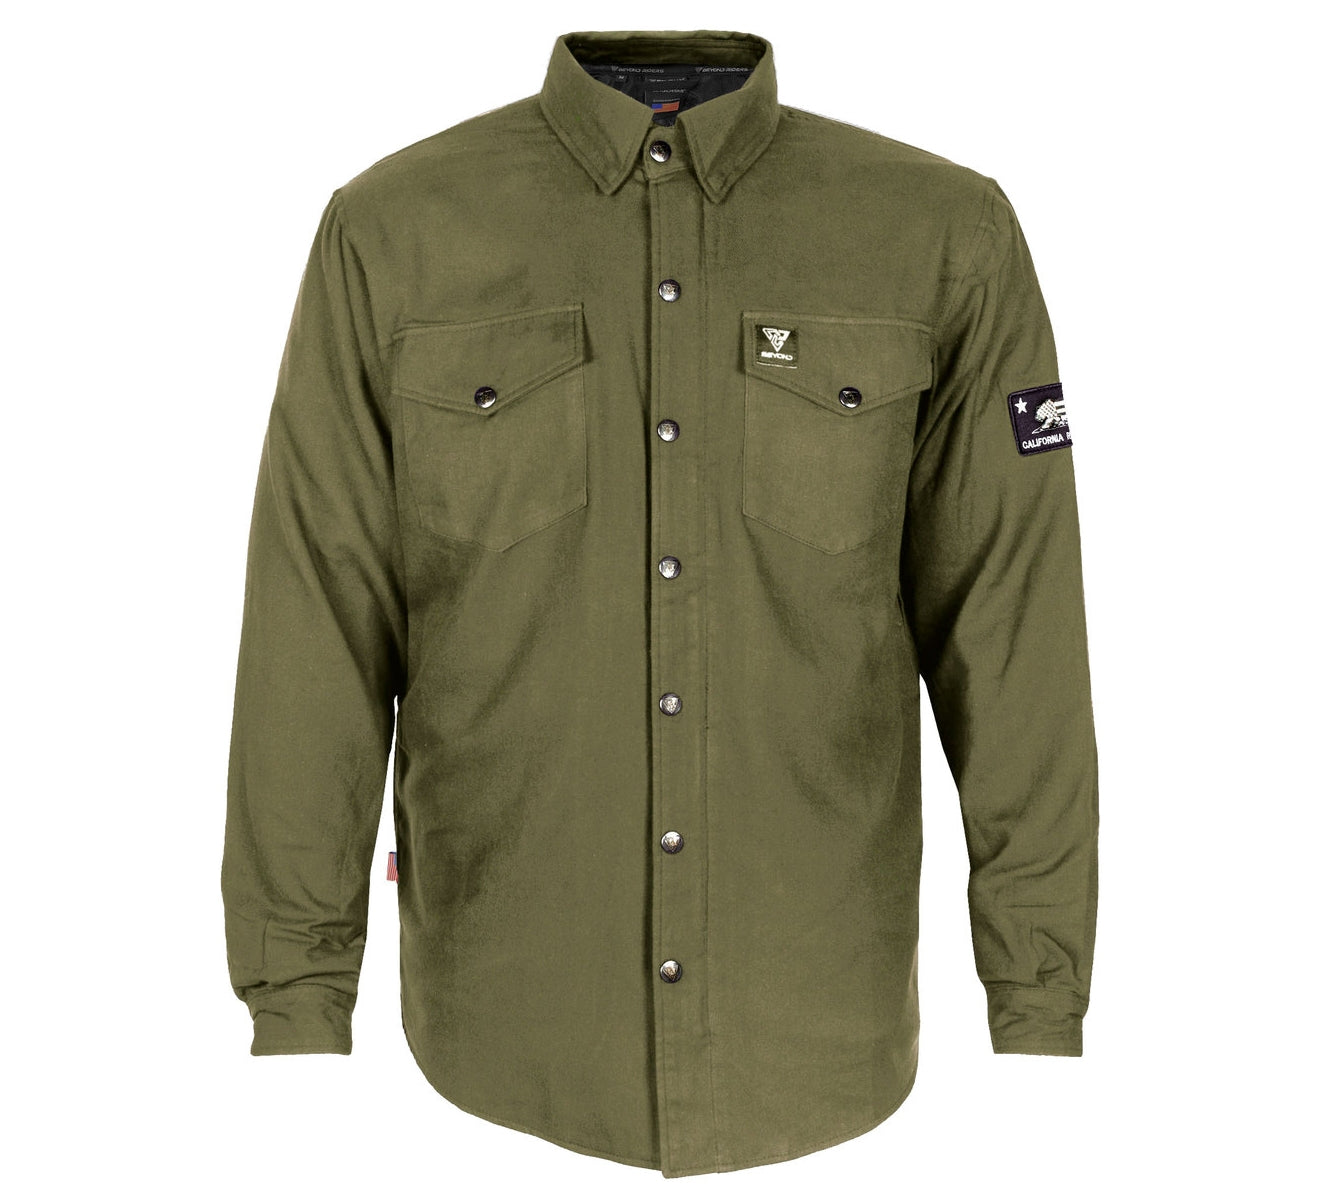 Protective Flannel Shirt - Army Green Solid with Pads